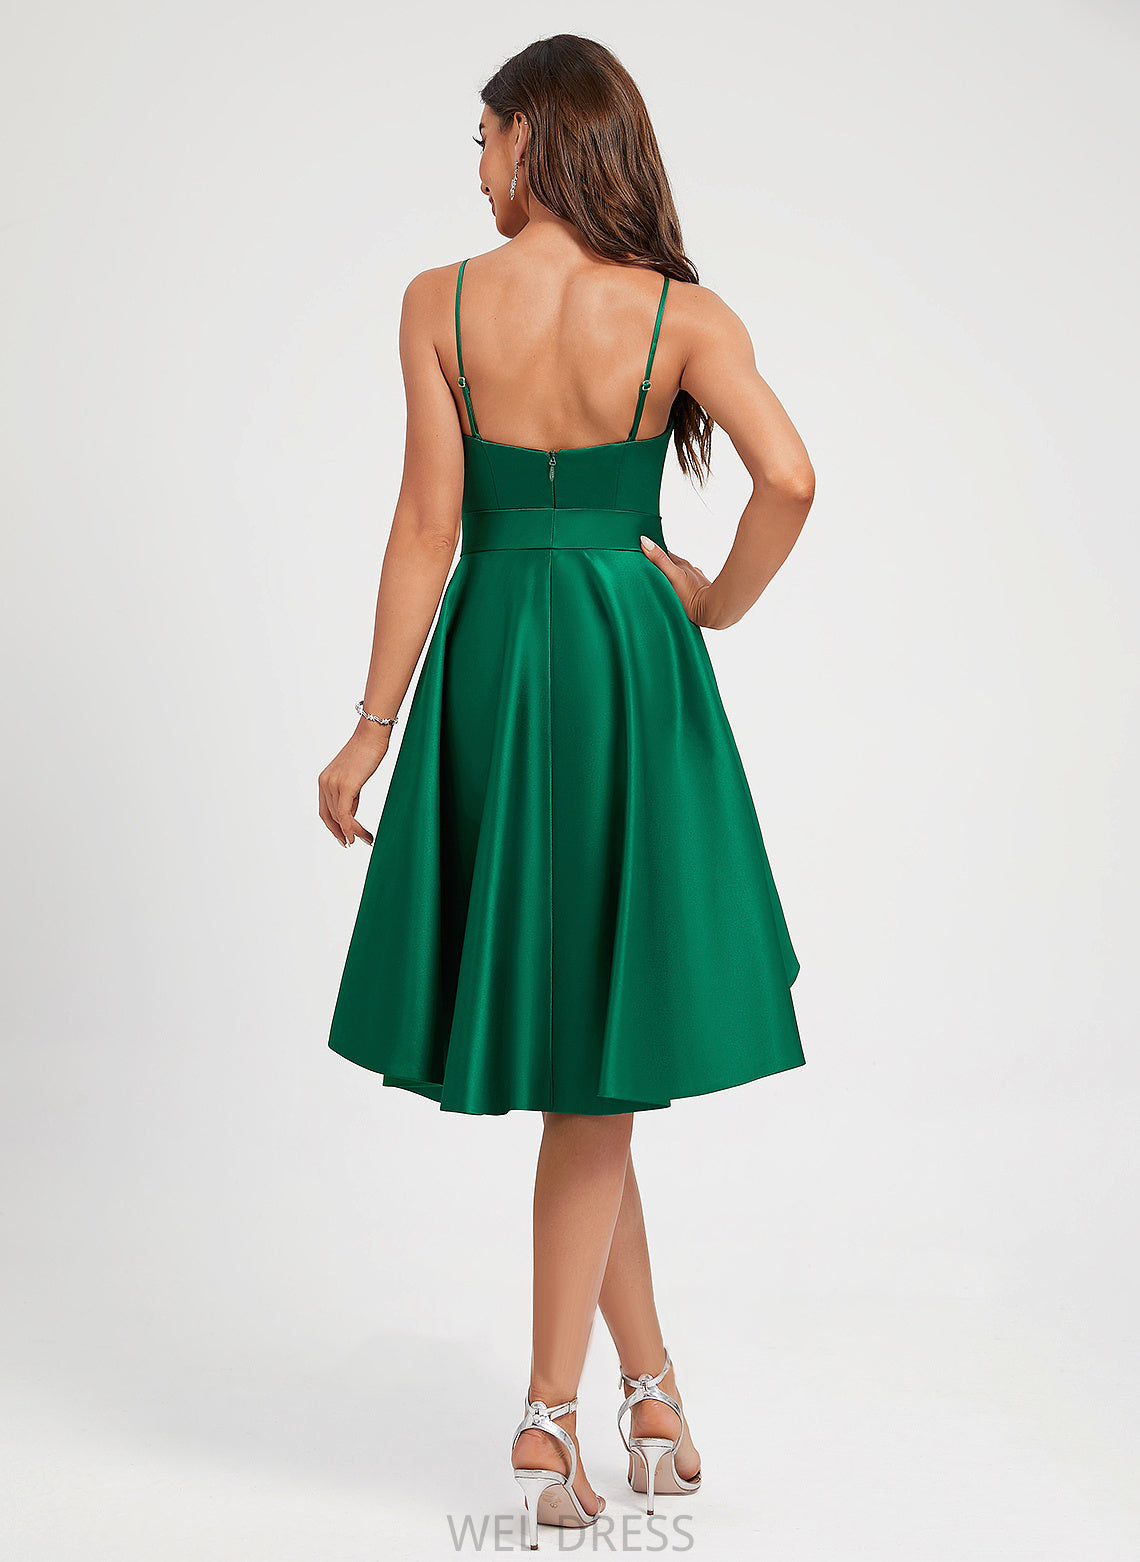 A-Line Dress Neckline Homecoming Dresses Ruffle Satin Bow(s) Square Knee-Length With Hannah Homecoming